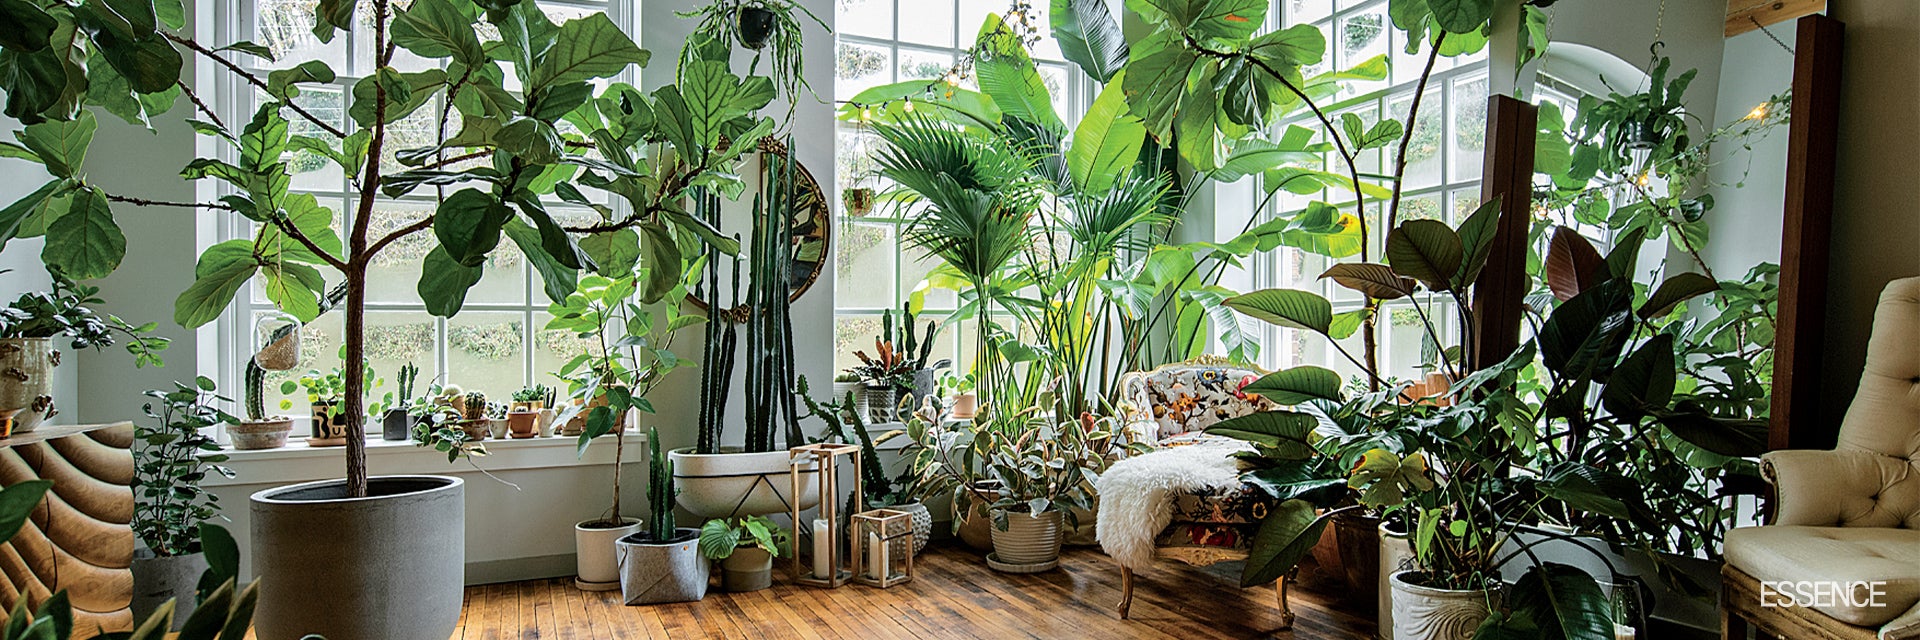 Plant Stylist Hilton Carter’s Home Will Make You Green With Envy